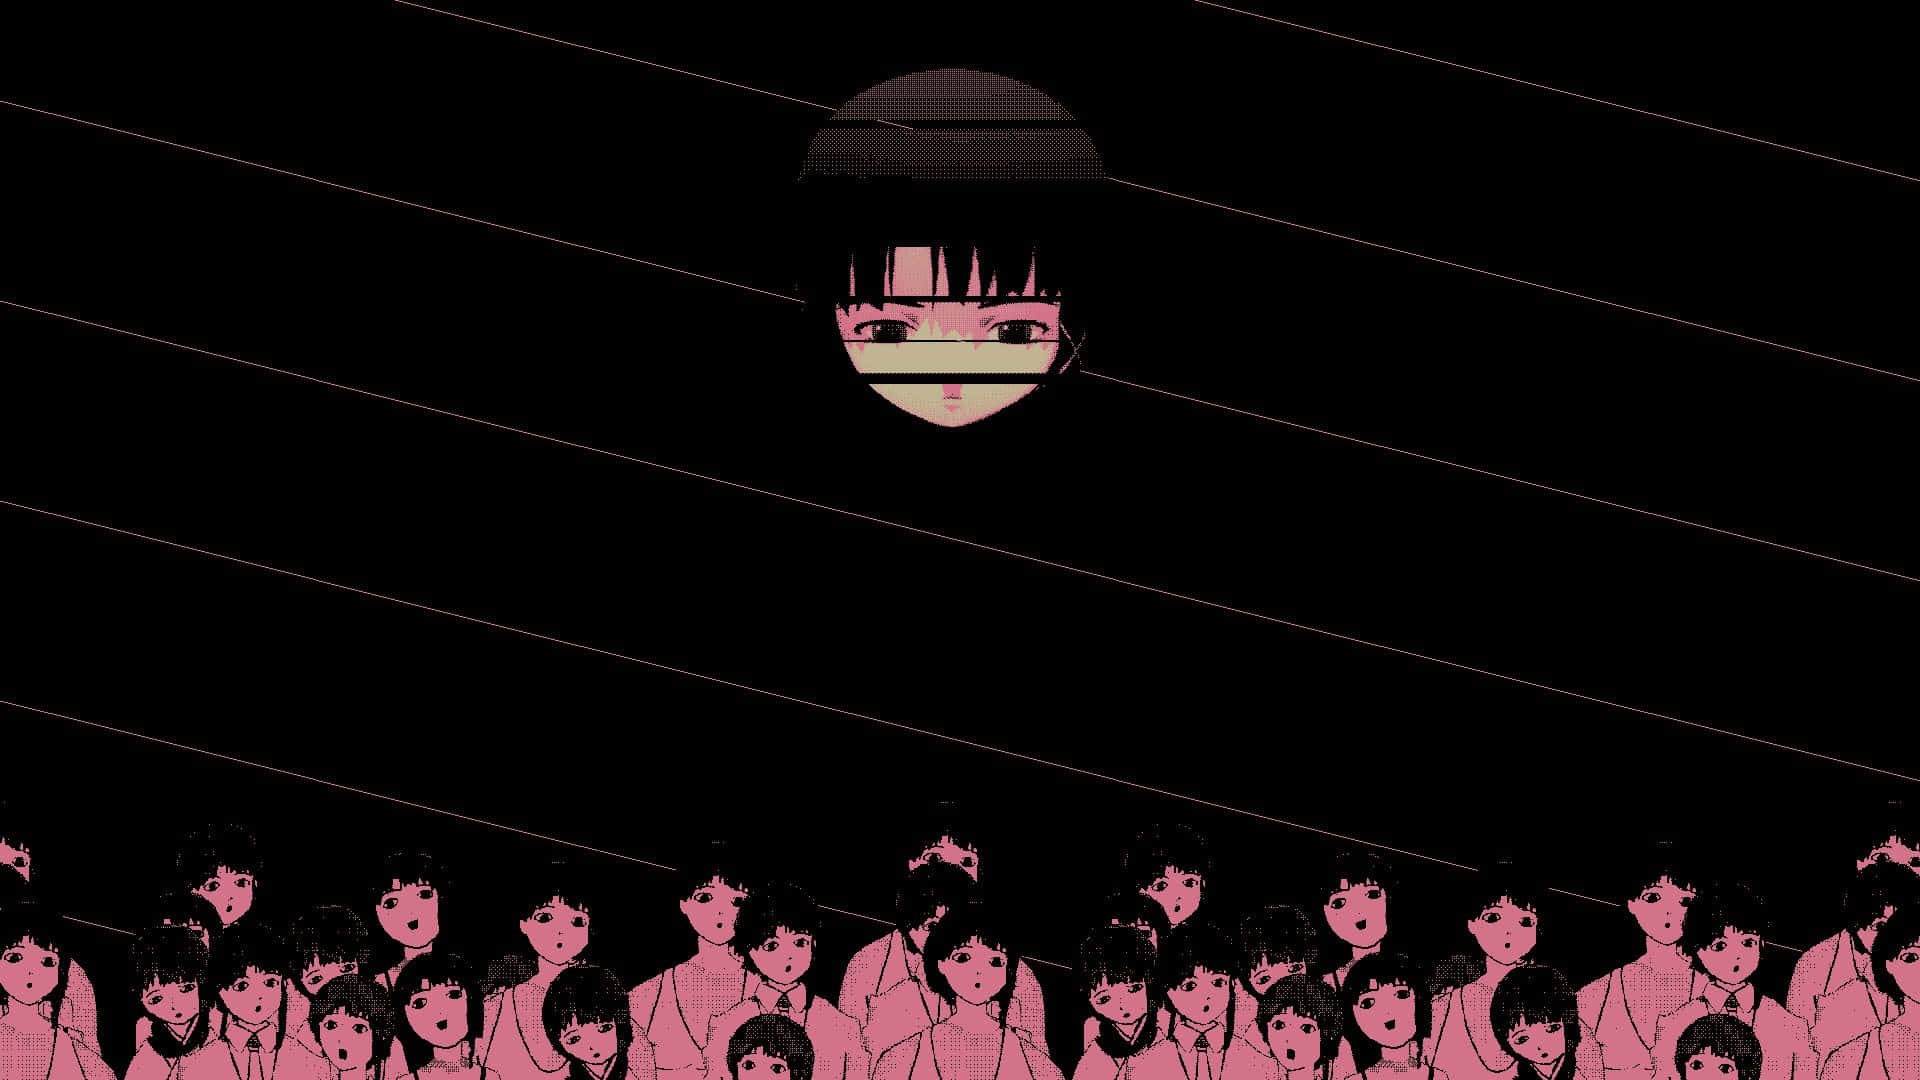 "Enter into the World of Serial Experiments Lain." Wallpaper